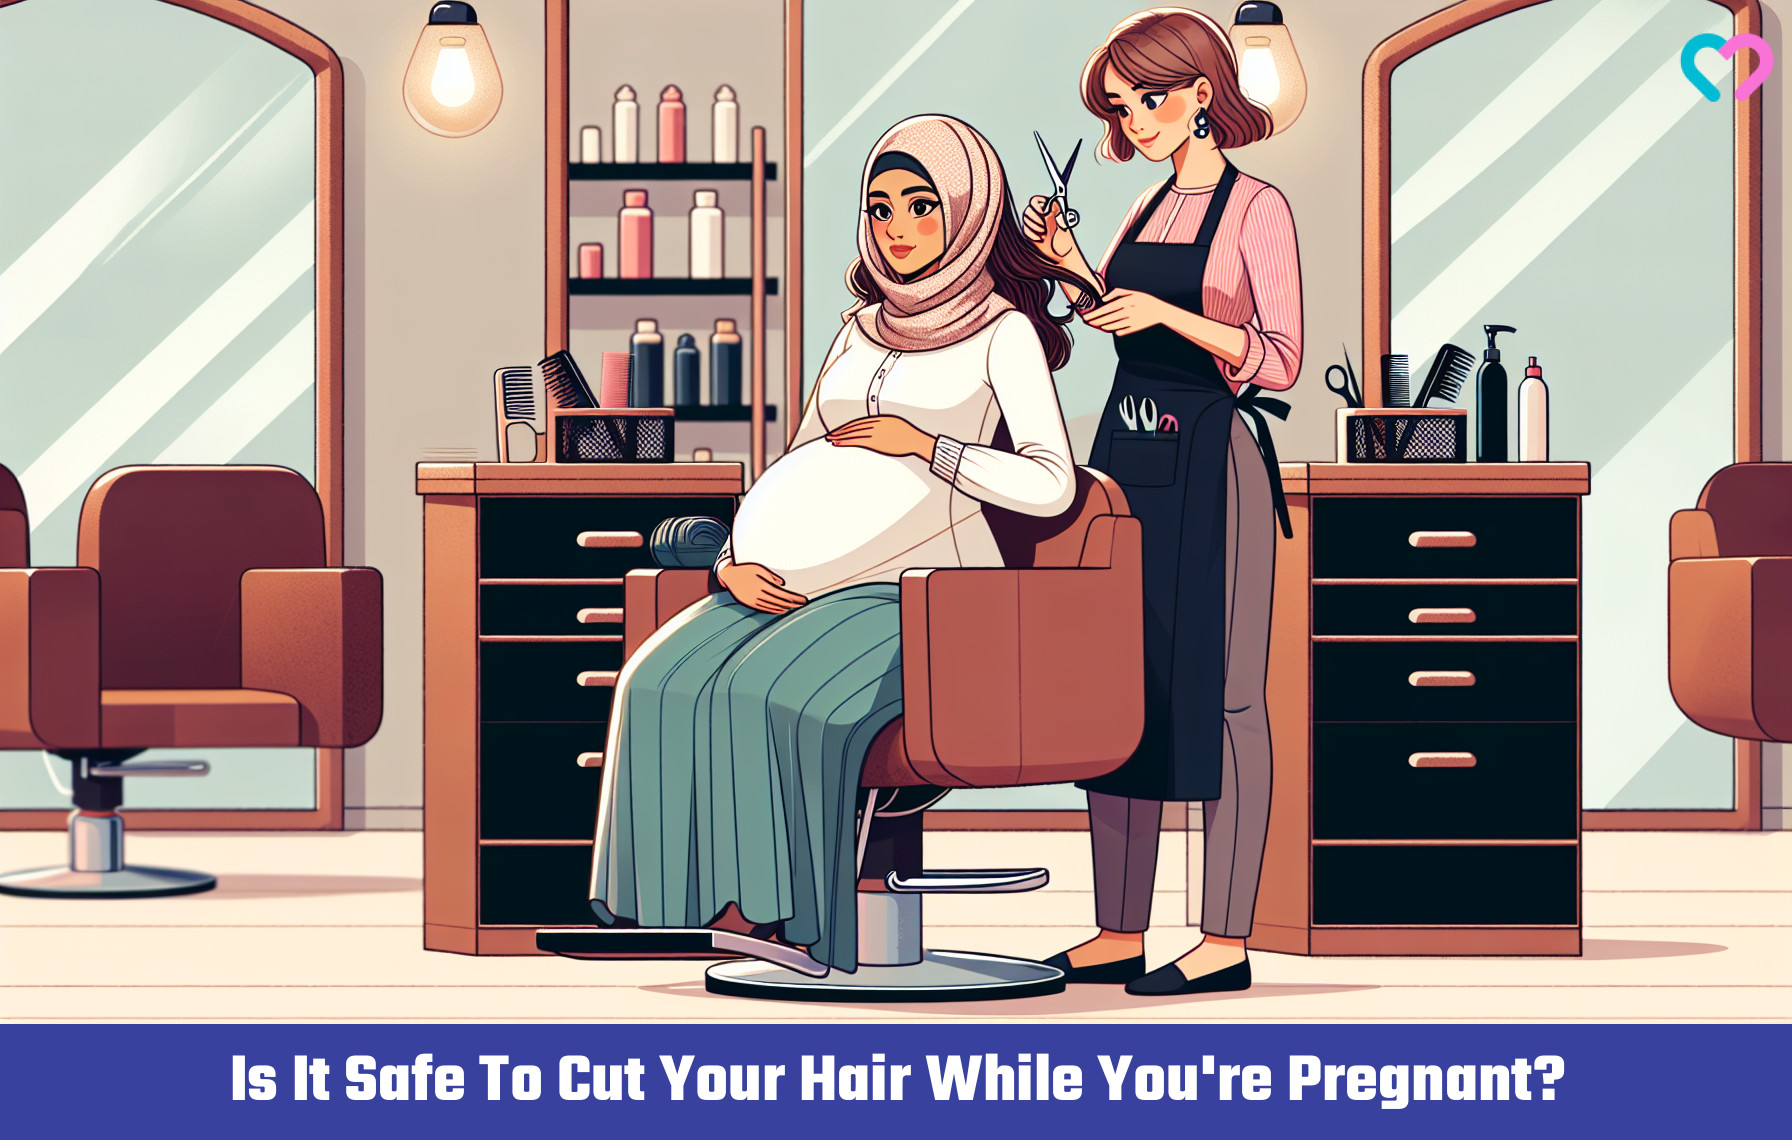 Haircut during pregnancy_illustration